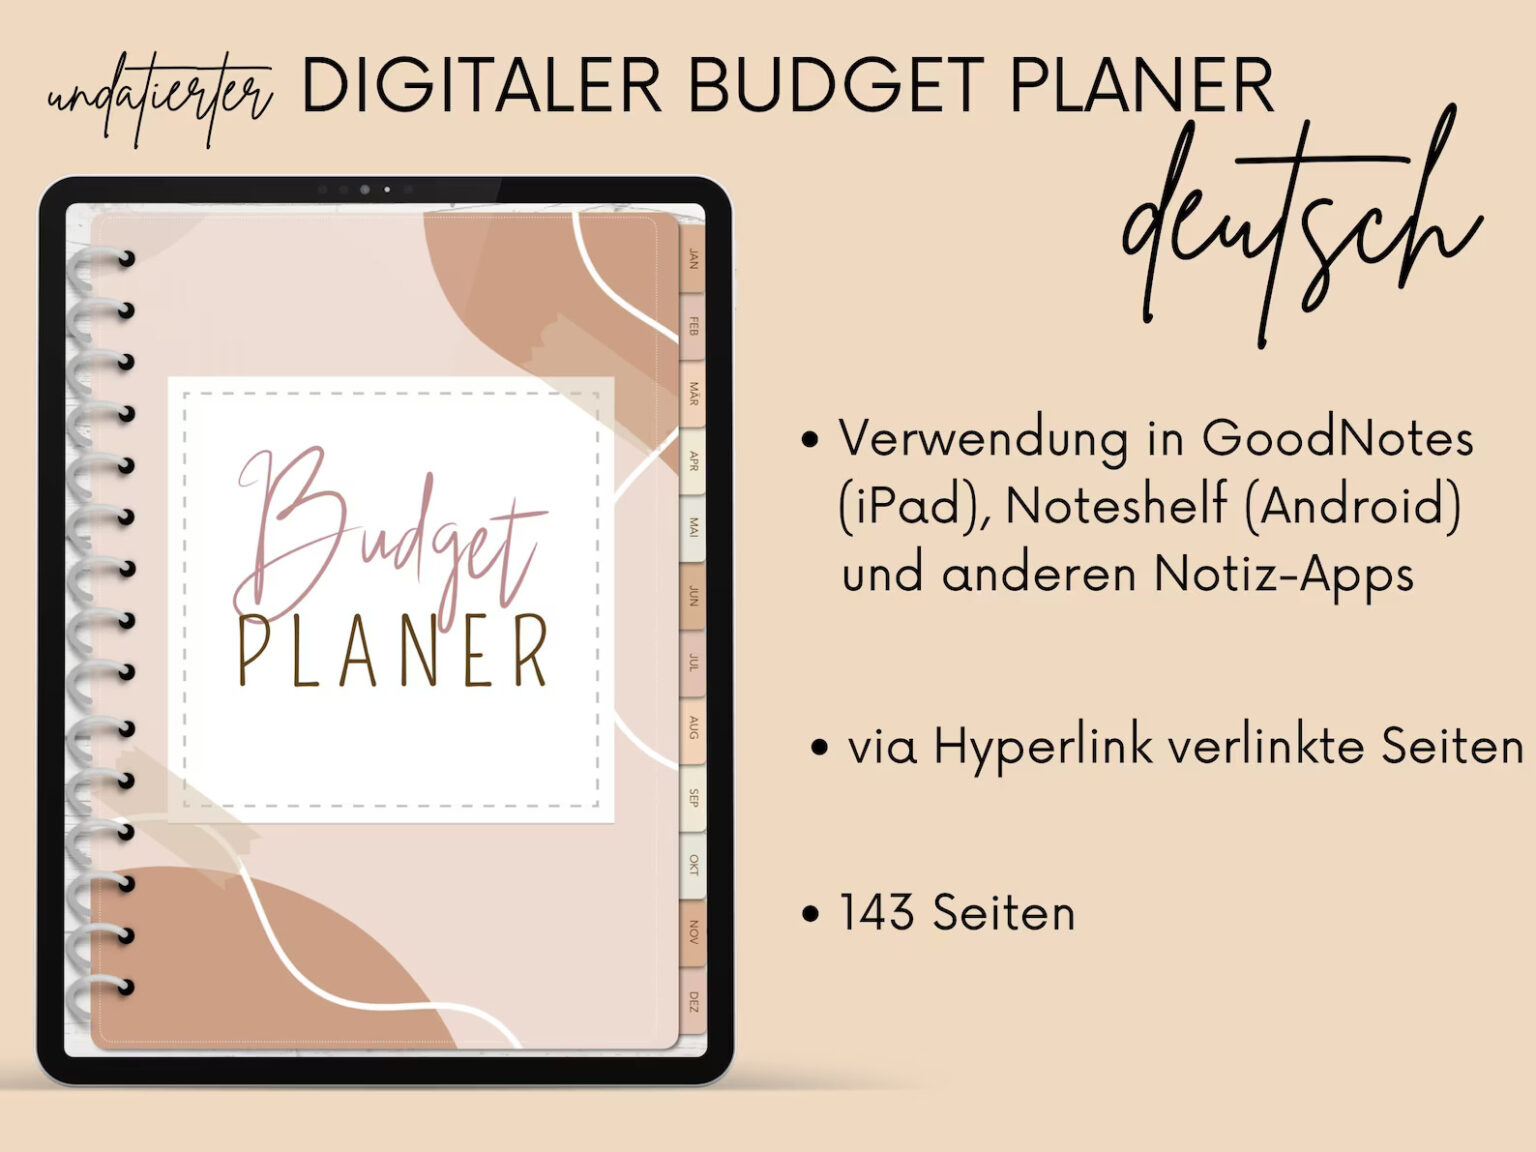 Best Goodnotes Budgeting Templates Graphic Pie